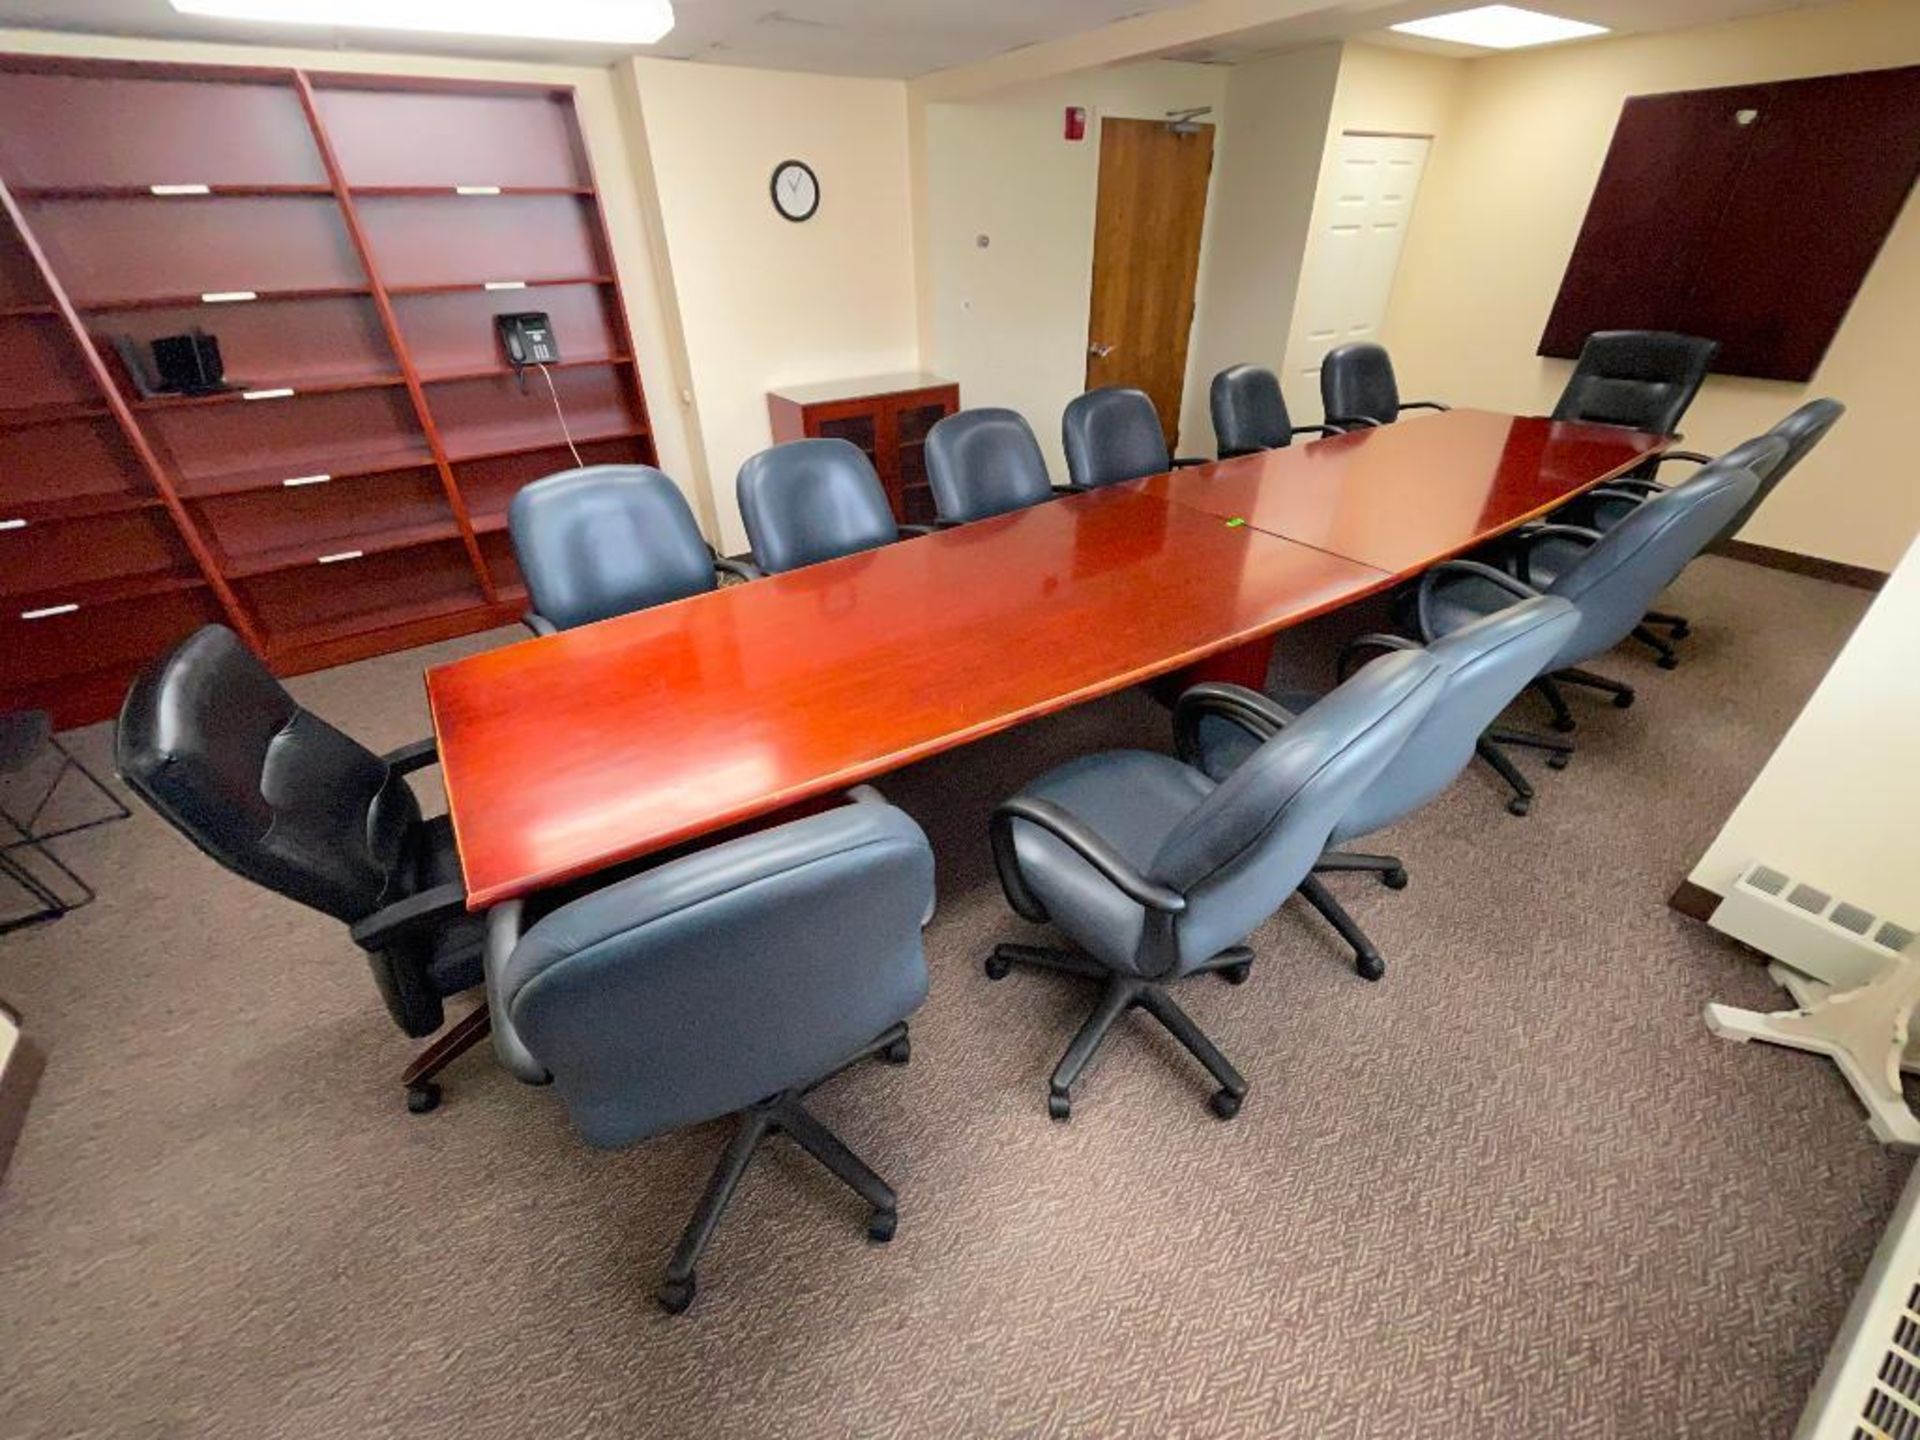 DESCRIPTION: 15 PC. COMPLETE CONFERENCE TABLE SET ADDITIONAL INFORMATION: TABLE AND 14 CHAIRS INCLUD - Image 5 of 6